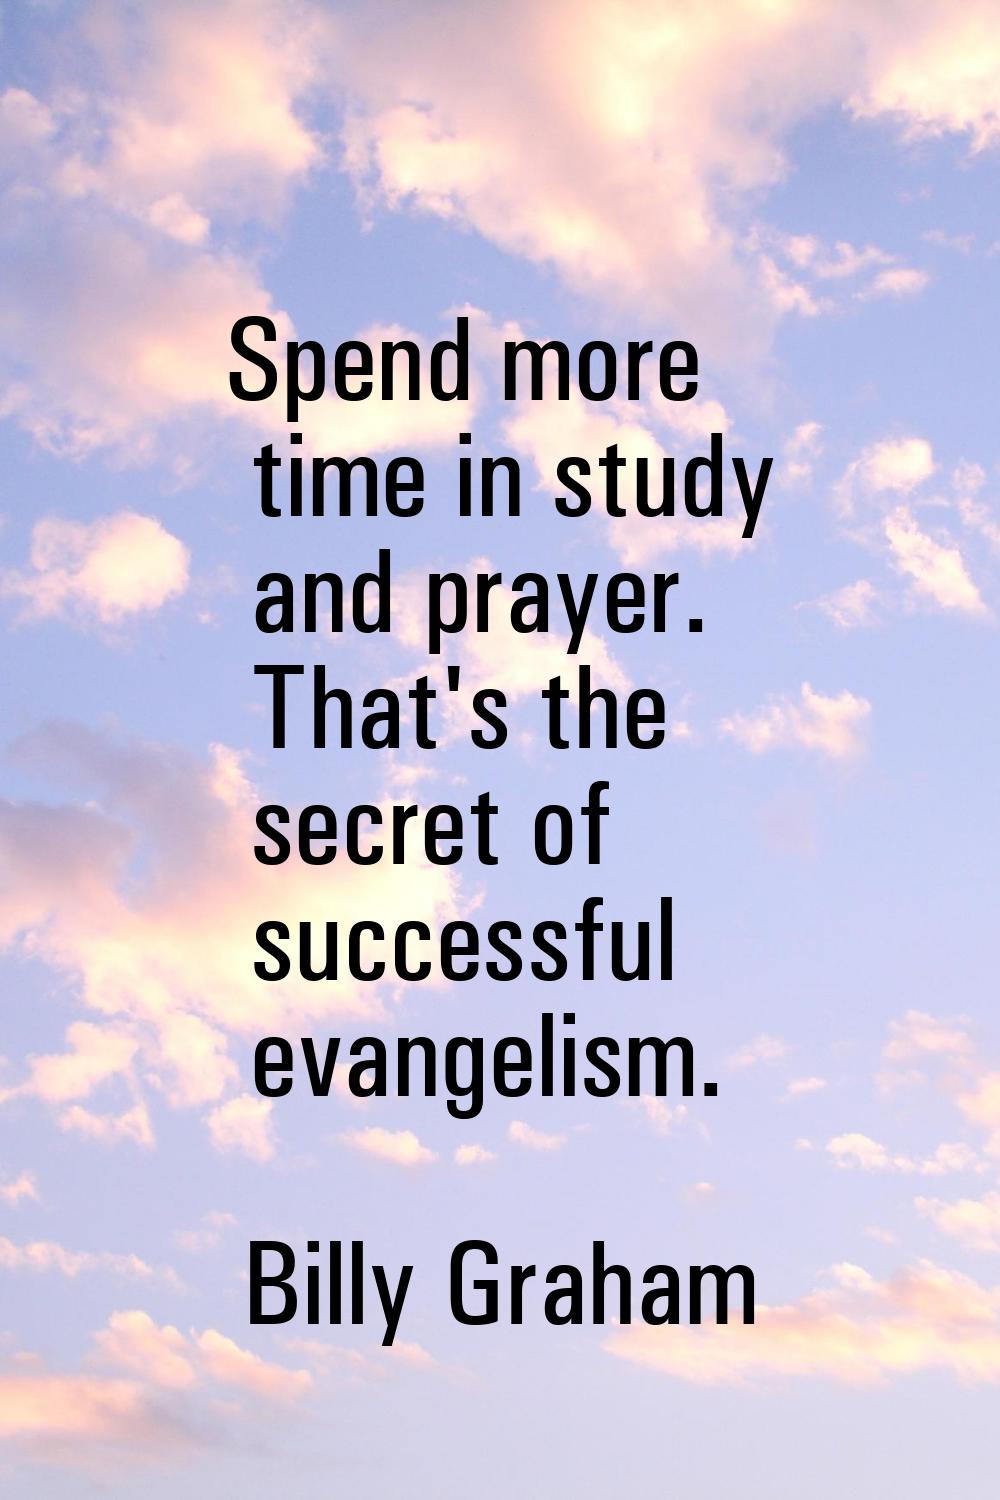 Spend more time in study and prayer. That's the secret of successful evangelism.